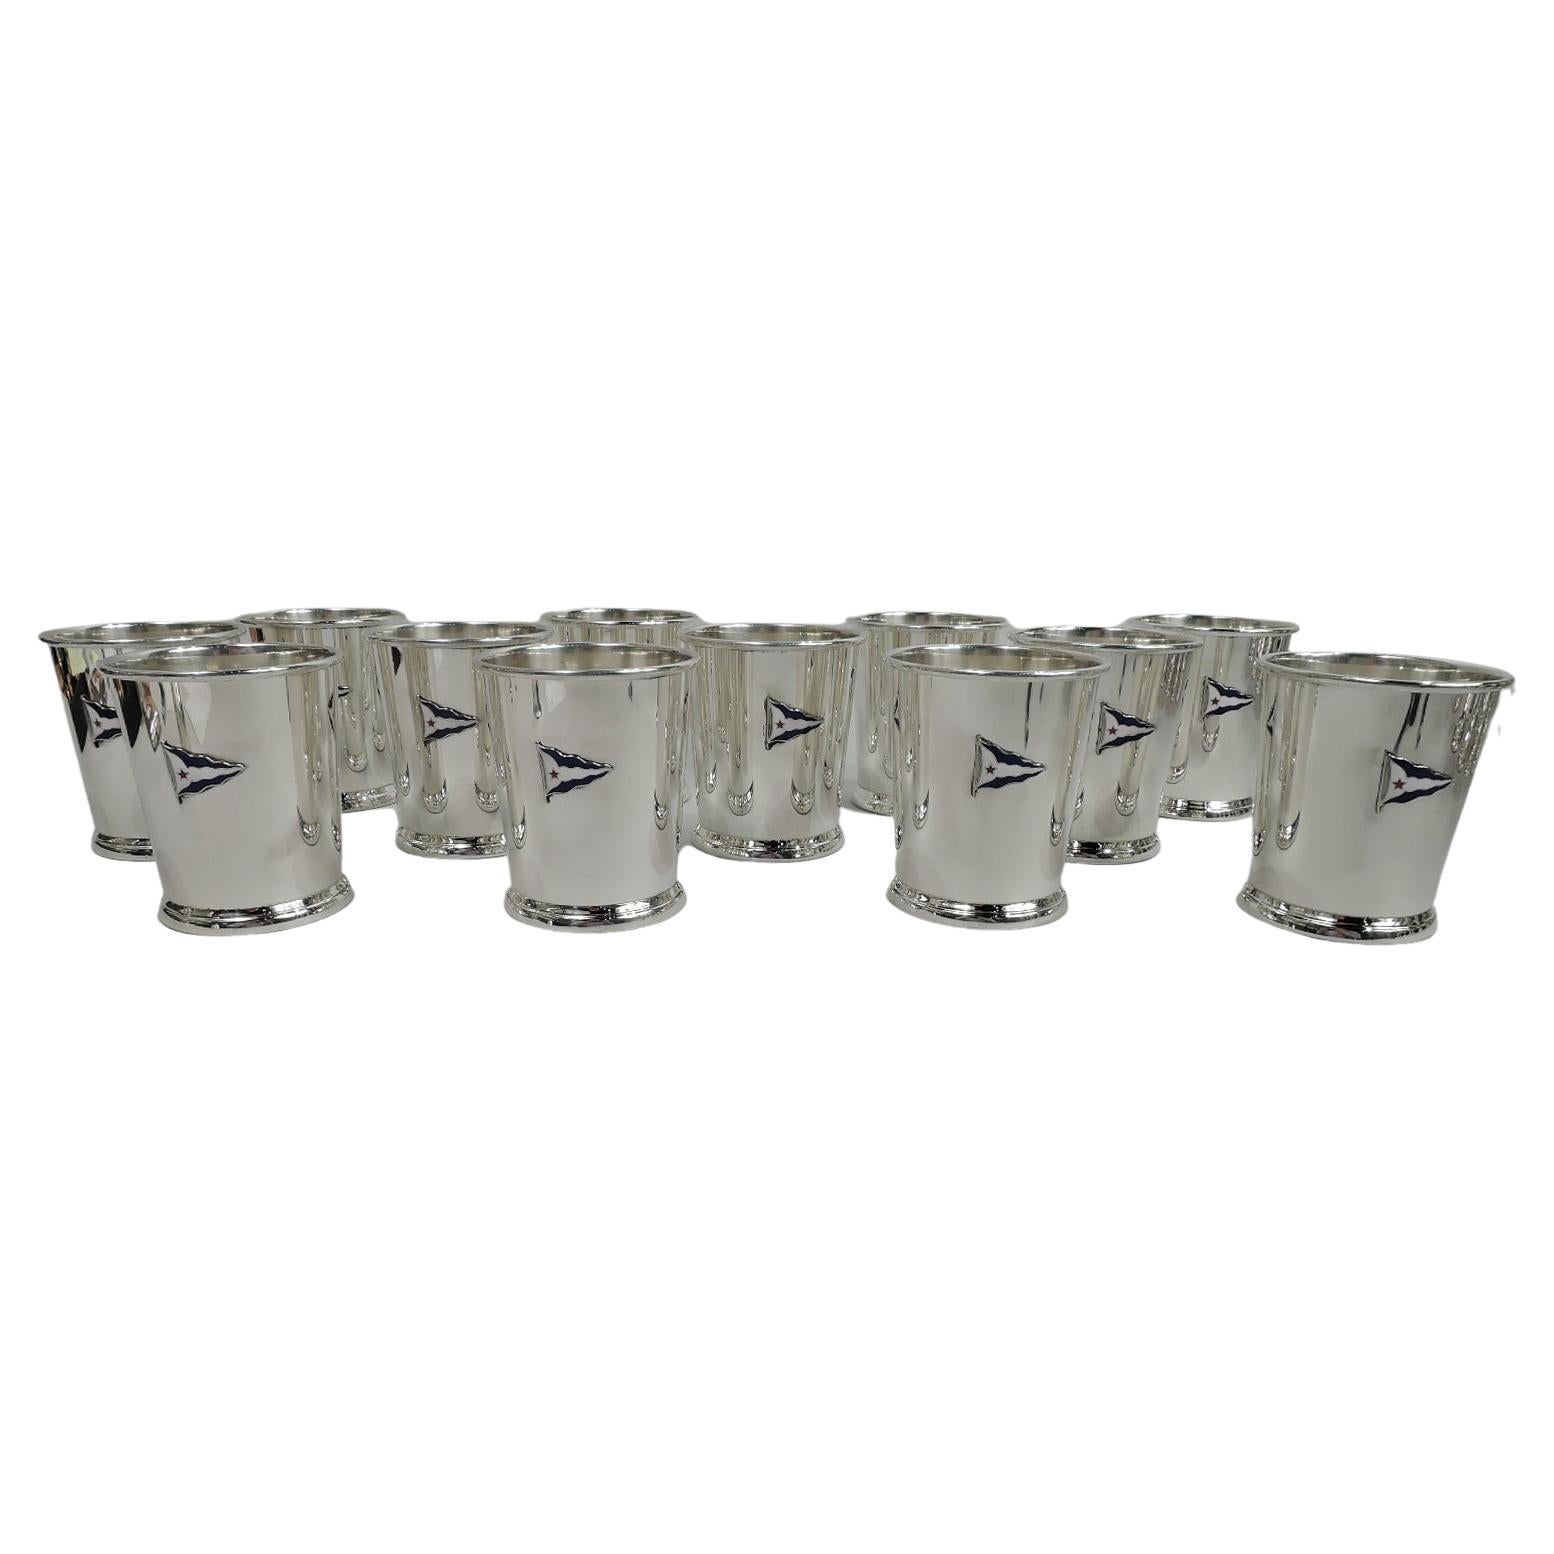 Set of 12 American Mint Juleps with Chicago Yacht Club Burgee